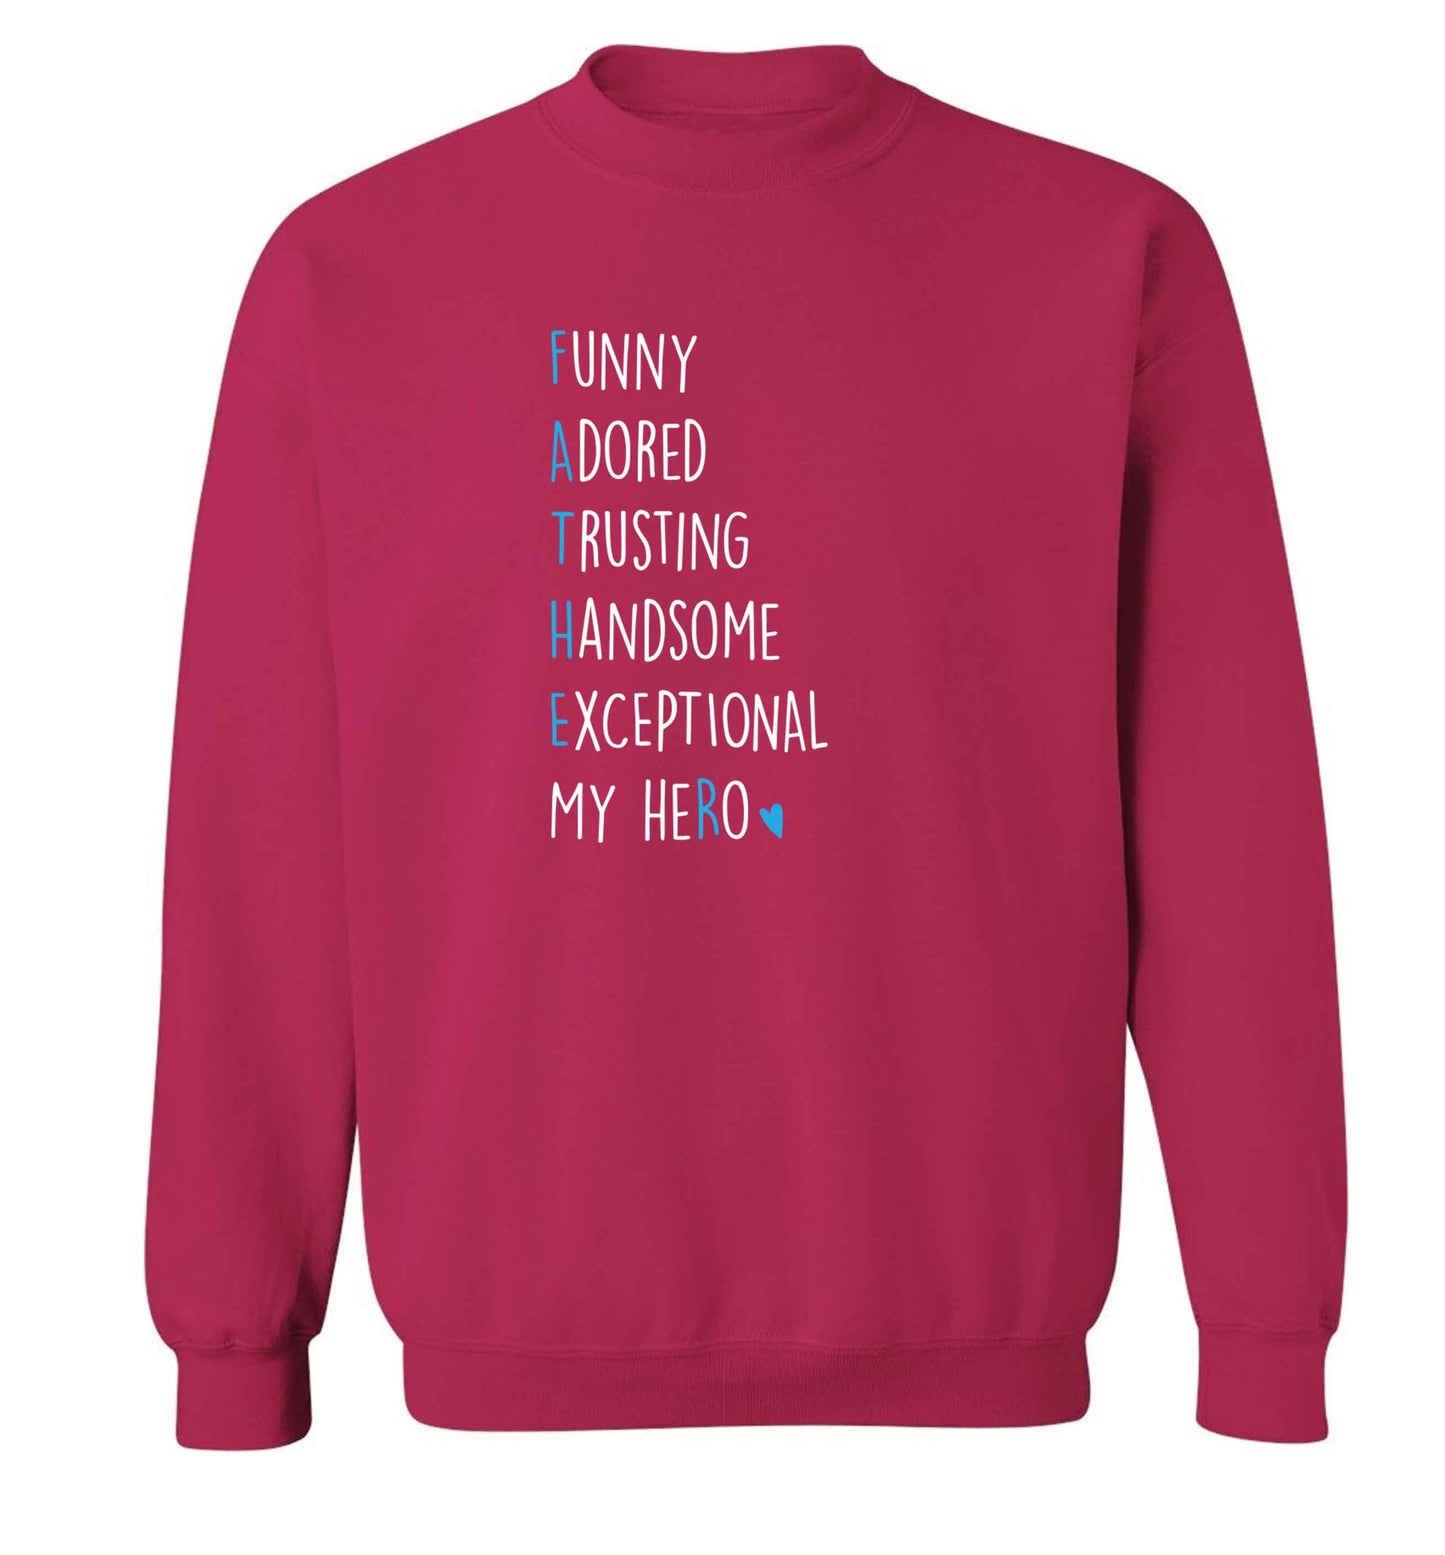 Father meaning hero acrostic poem adult's unisex pink sweater 2XL